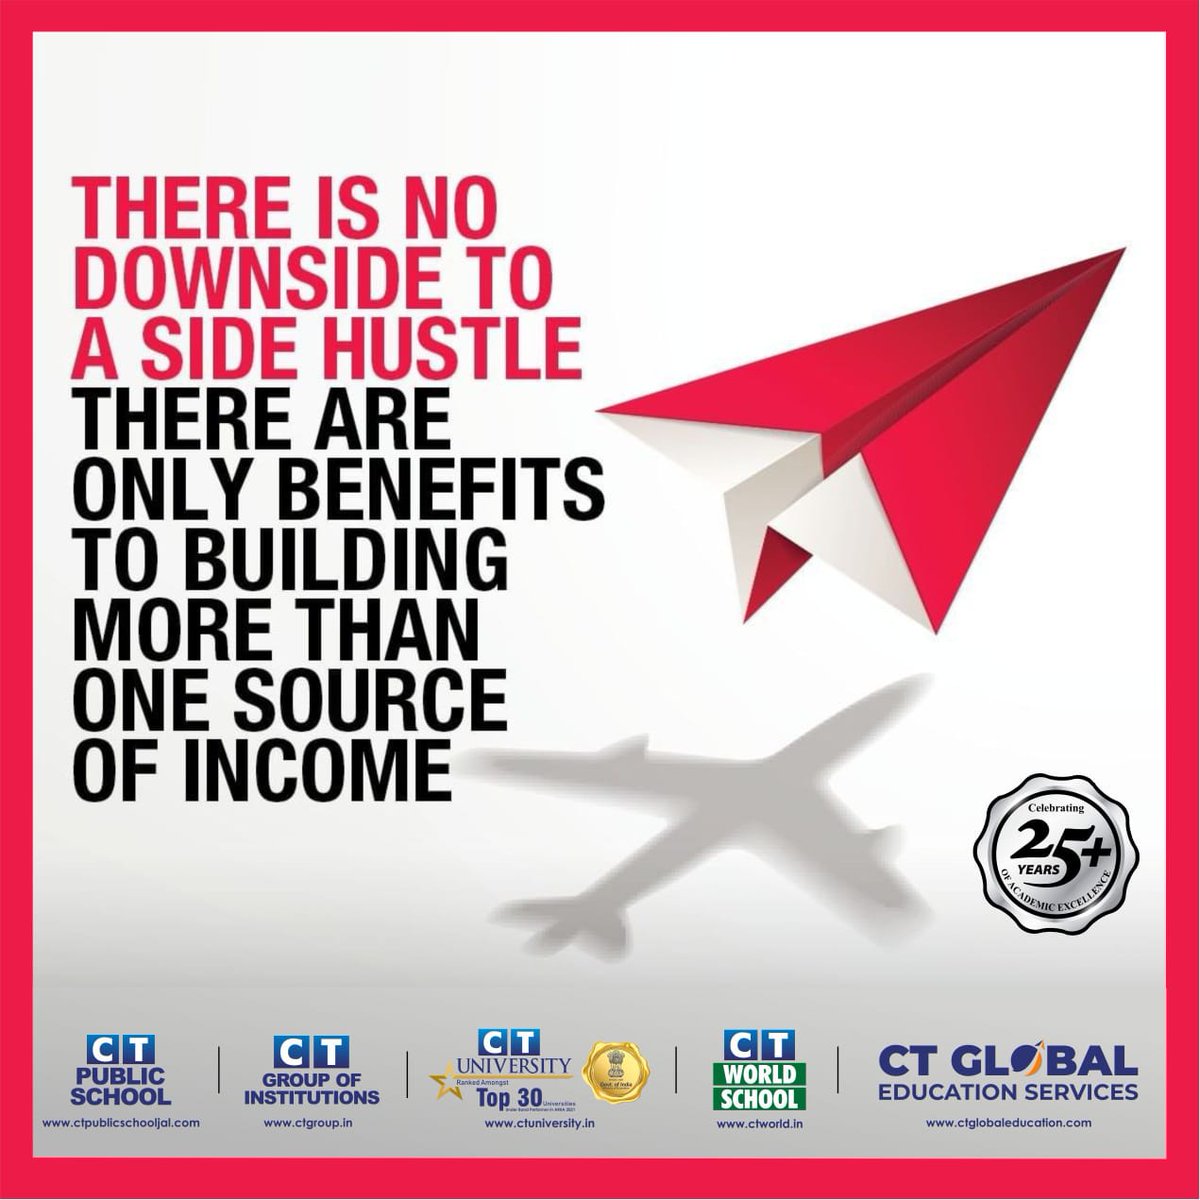 There is no downside to side hustle, there are only benefits to building more than one source of income.

#ctgroup #bestcollege #southcampus #ctihm #ctihs #ctiemt #morningpost #life #building #income #hustle